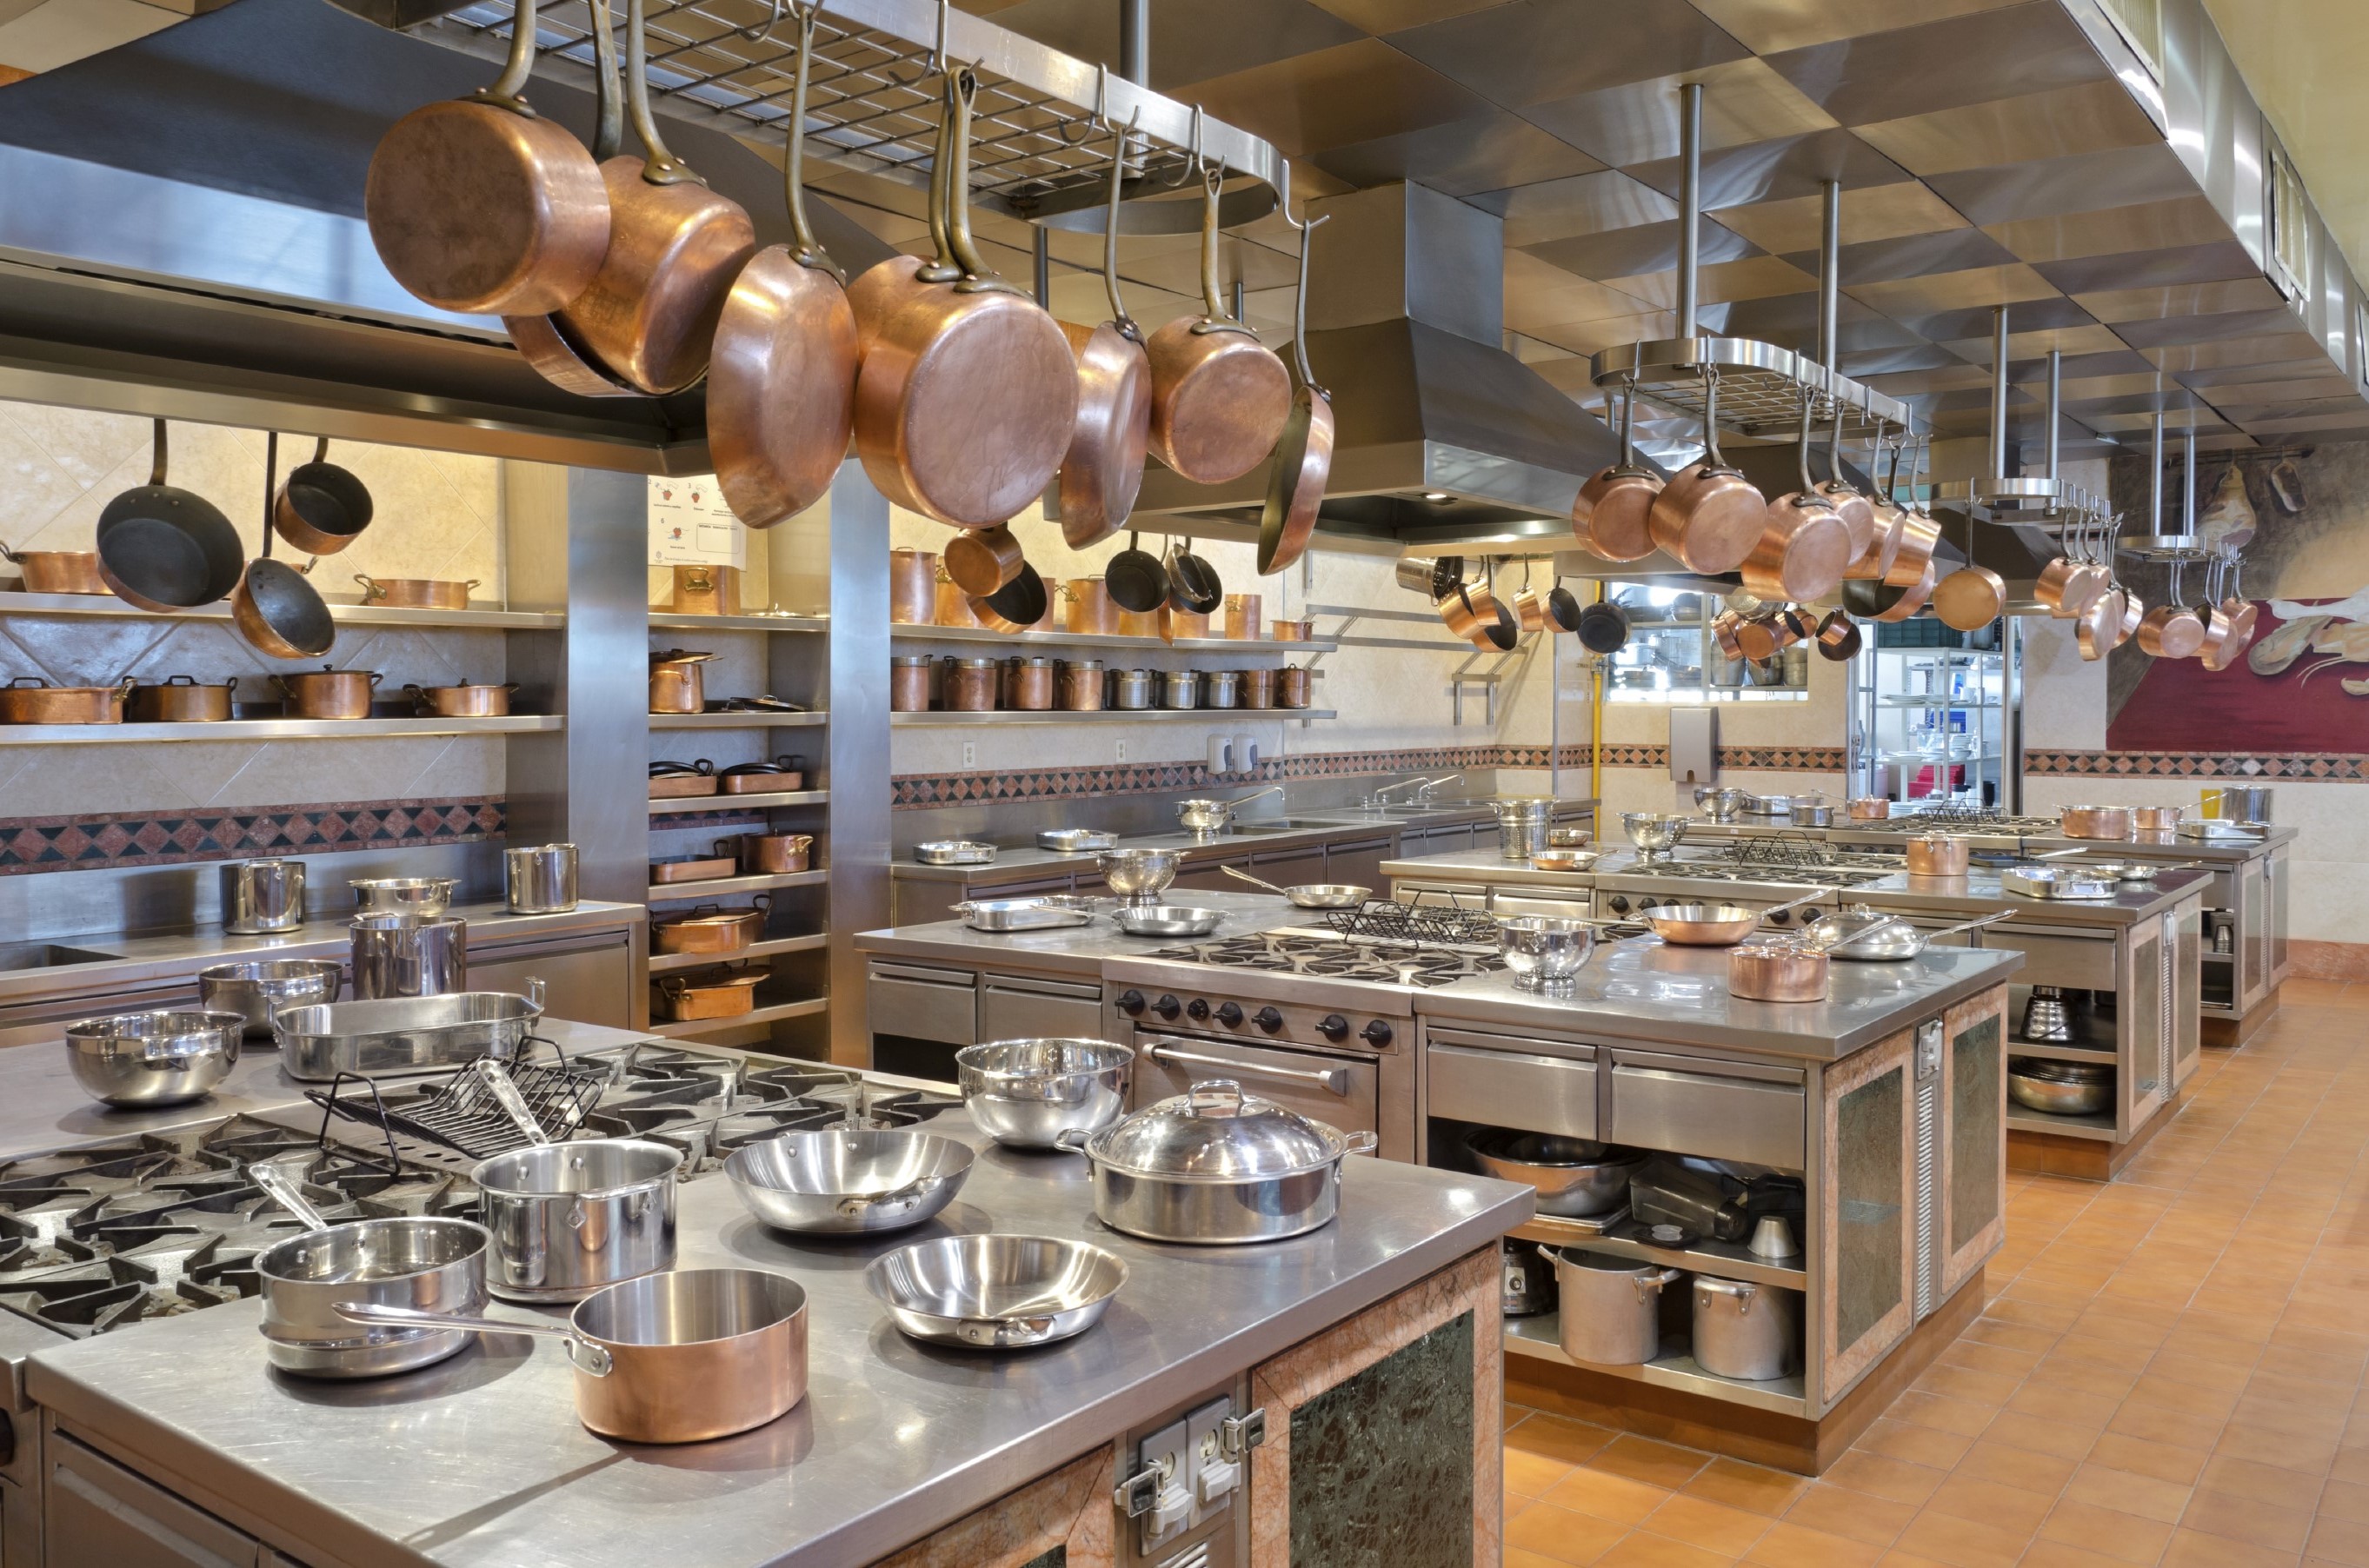 Materials To Consider For Commercial Kitchen Tools And Equipment